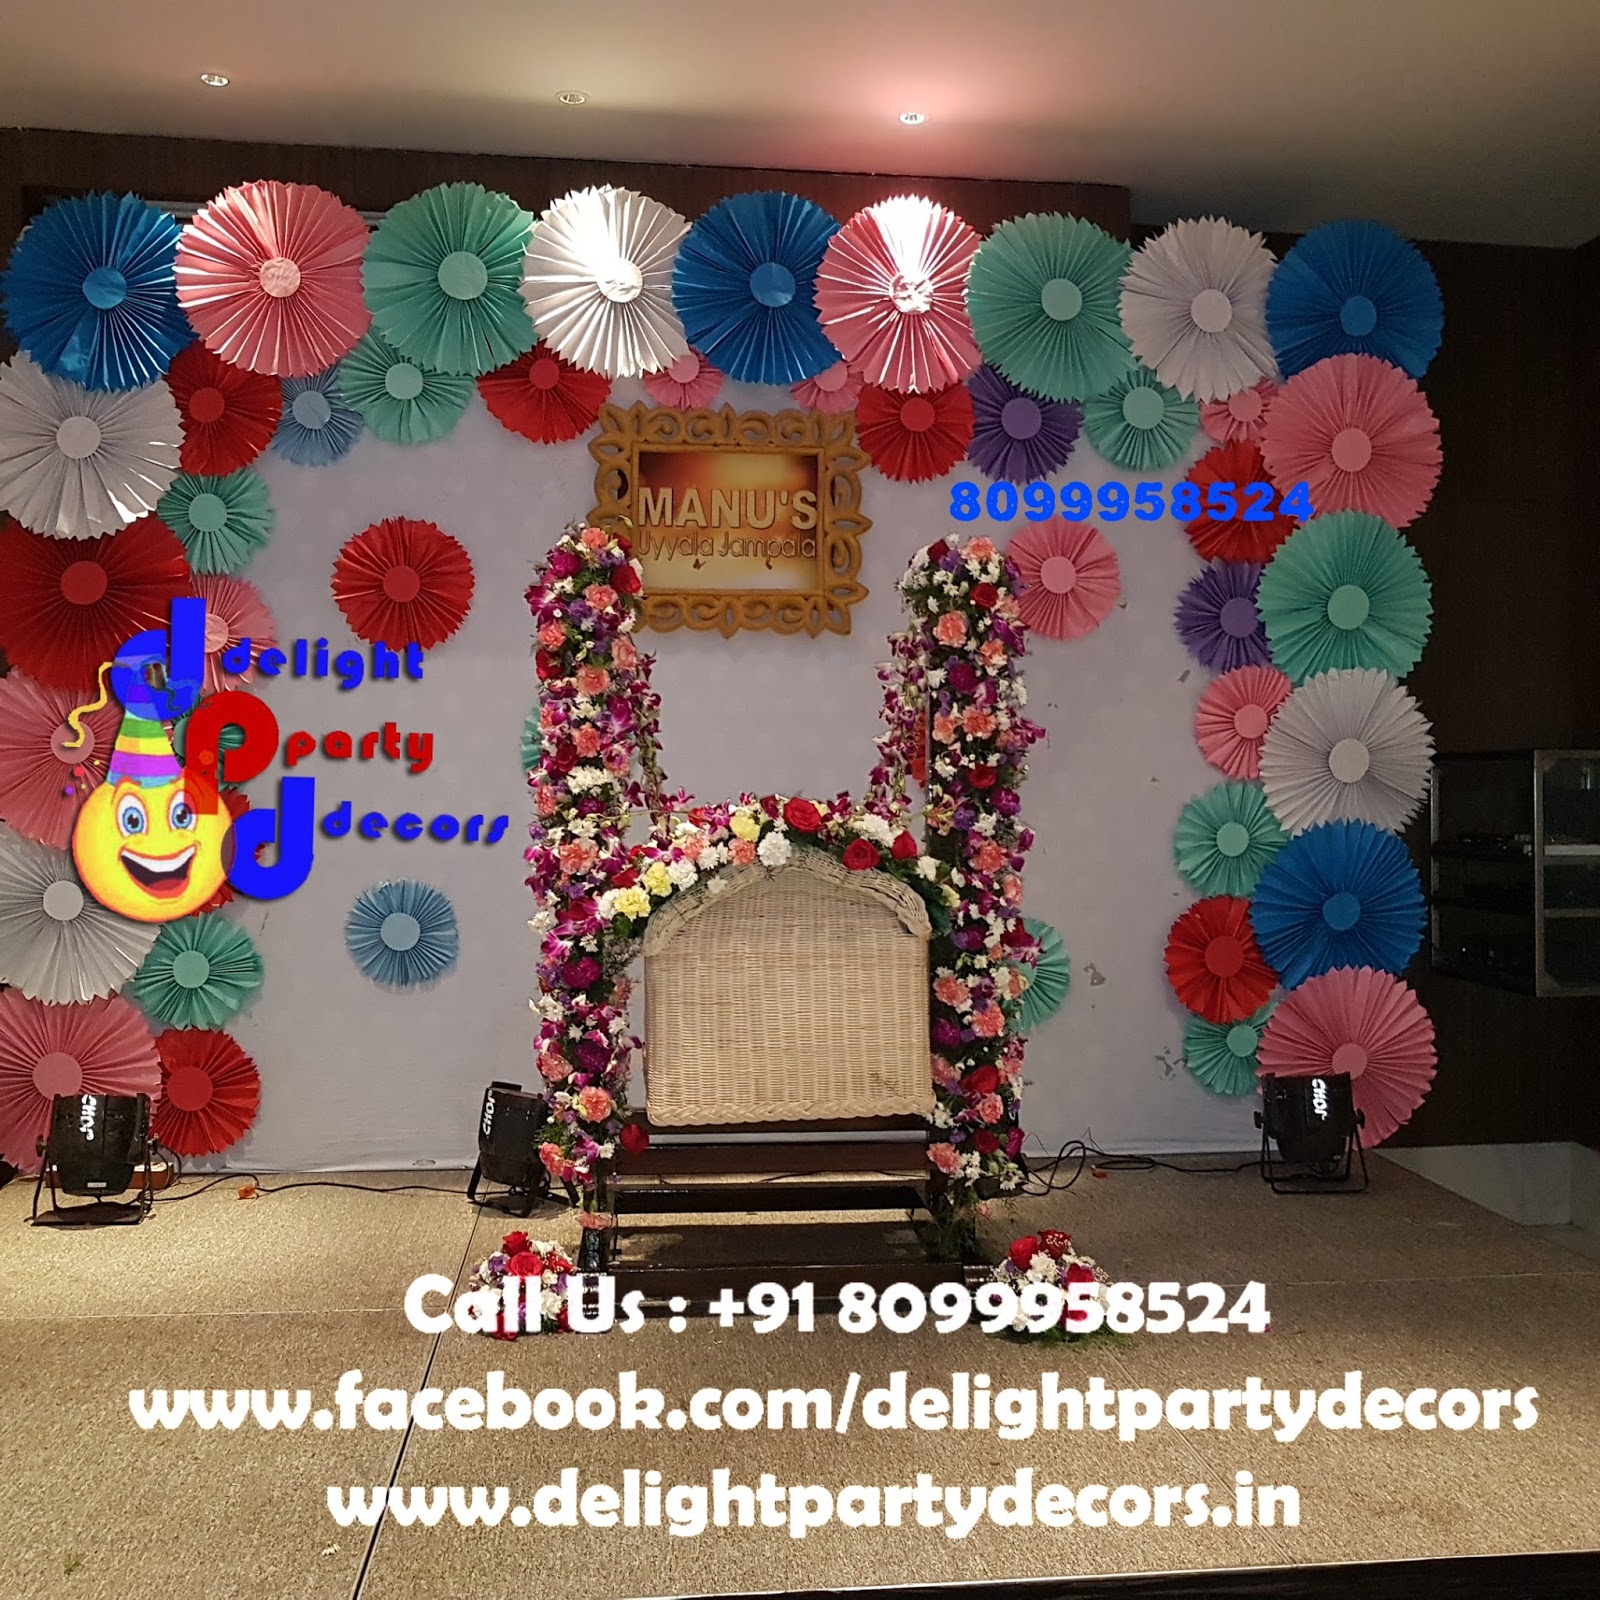 Delight Party Decors Best Decoration Ideas For Naming